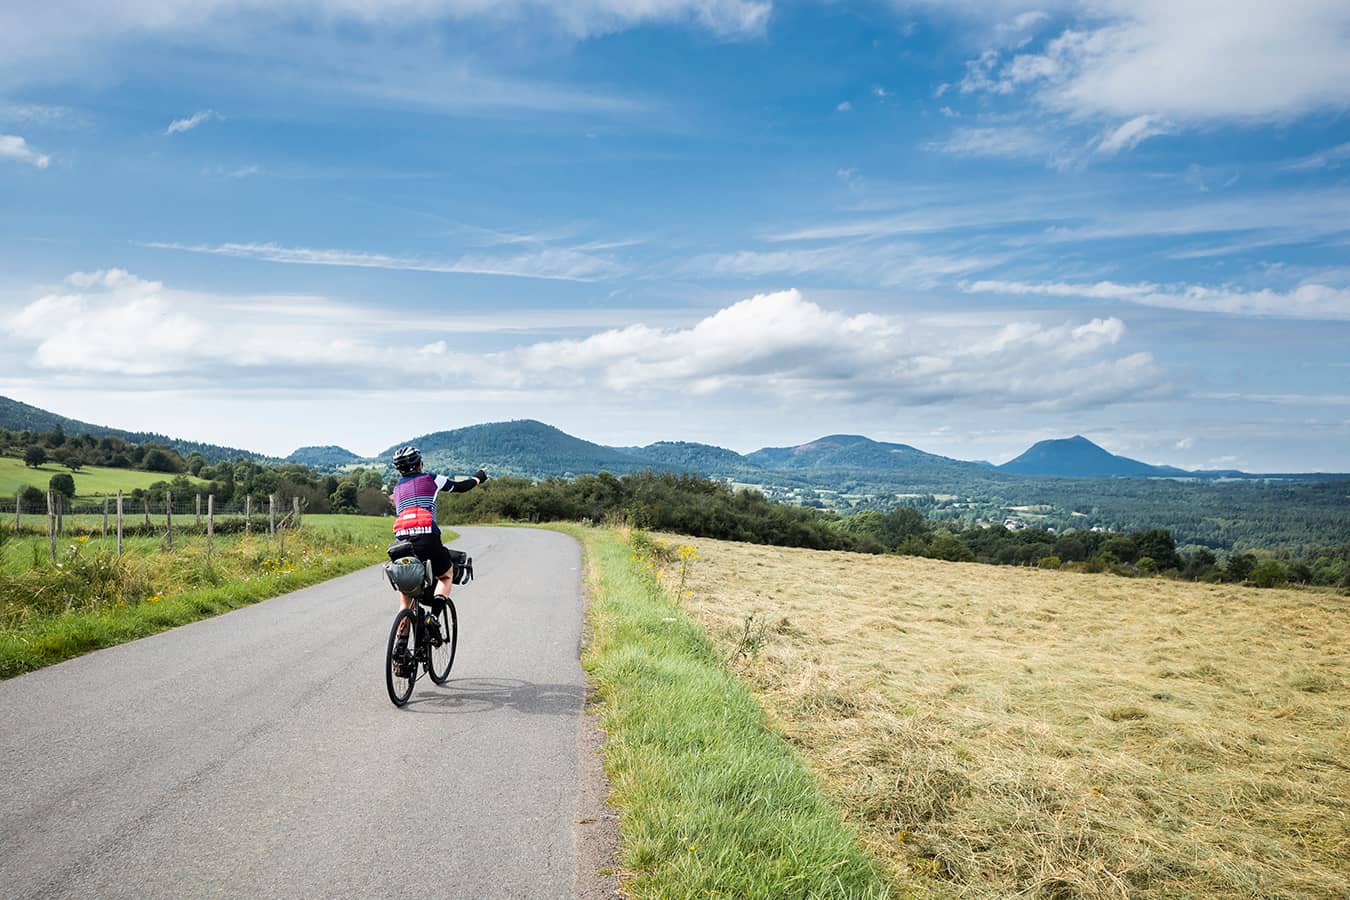 Sophie Gateau: A Tour of the Volcanoes of Auvergne